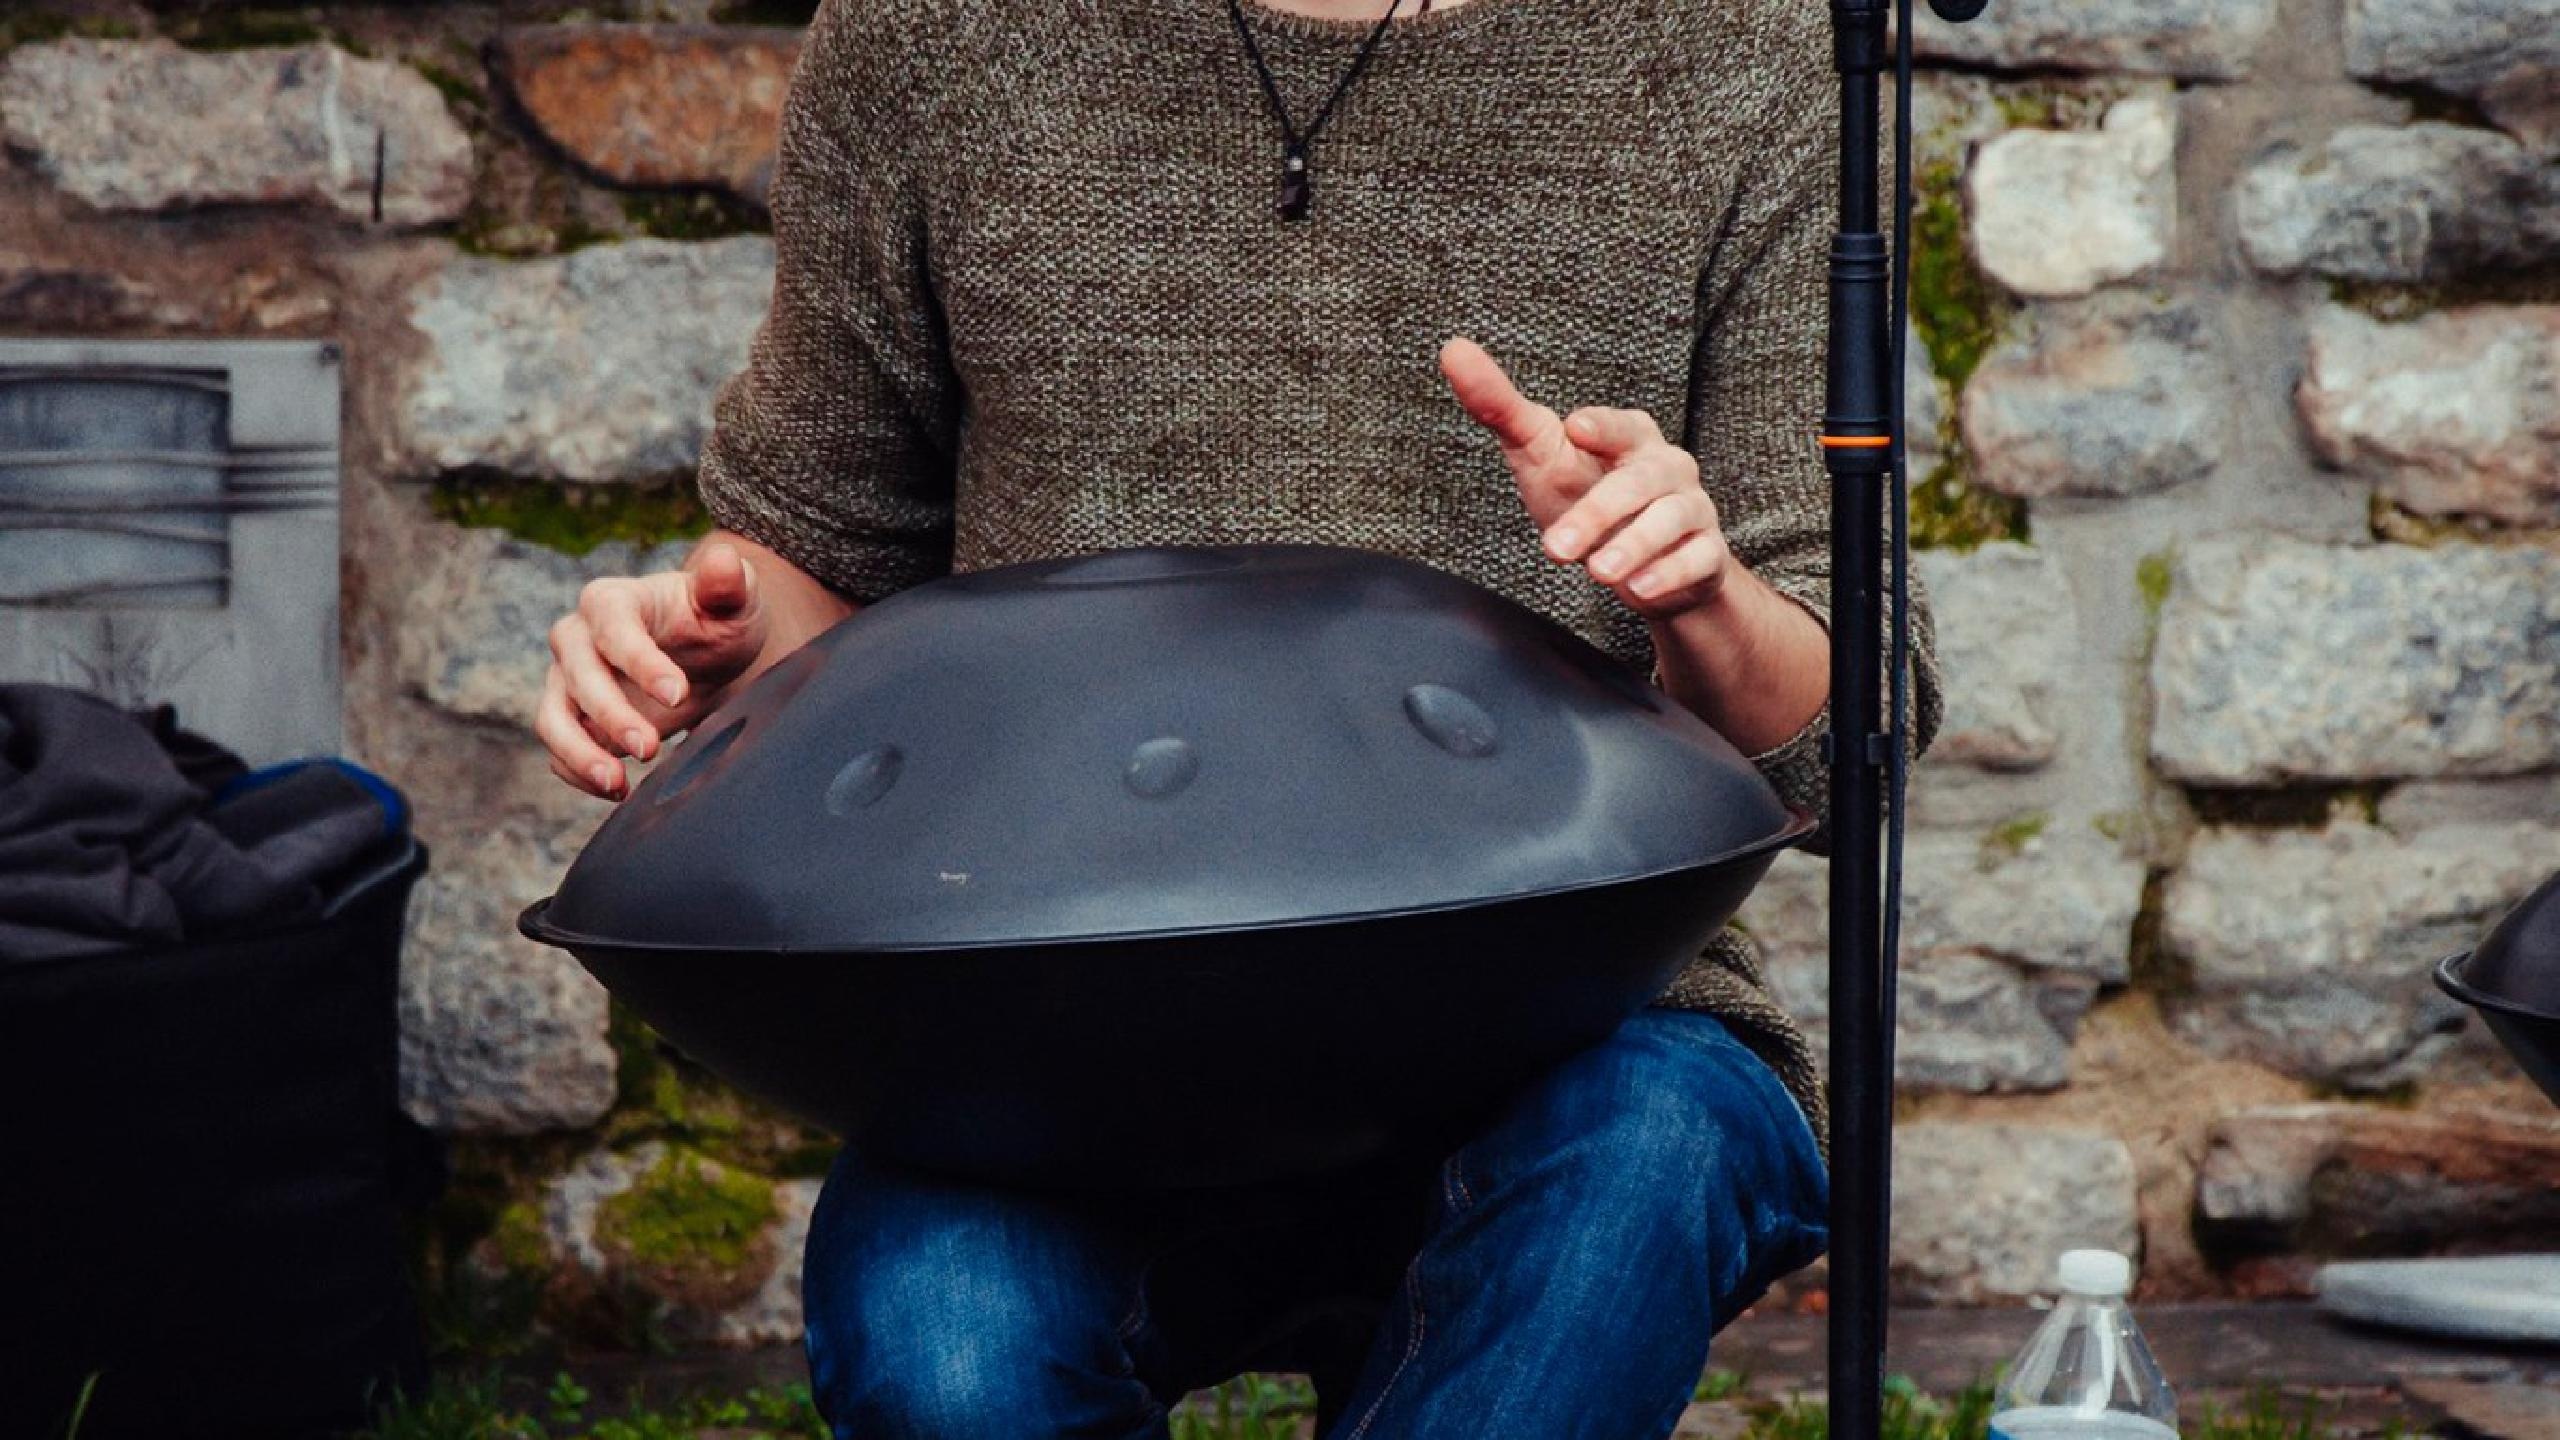 Handpan: A Musical Handpan Weekend In UK, Concert, Intuitive Instruments, Created in 2001 in Switzerland. 2560x1440 HD Background.